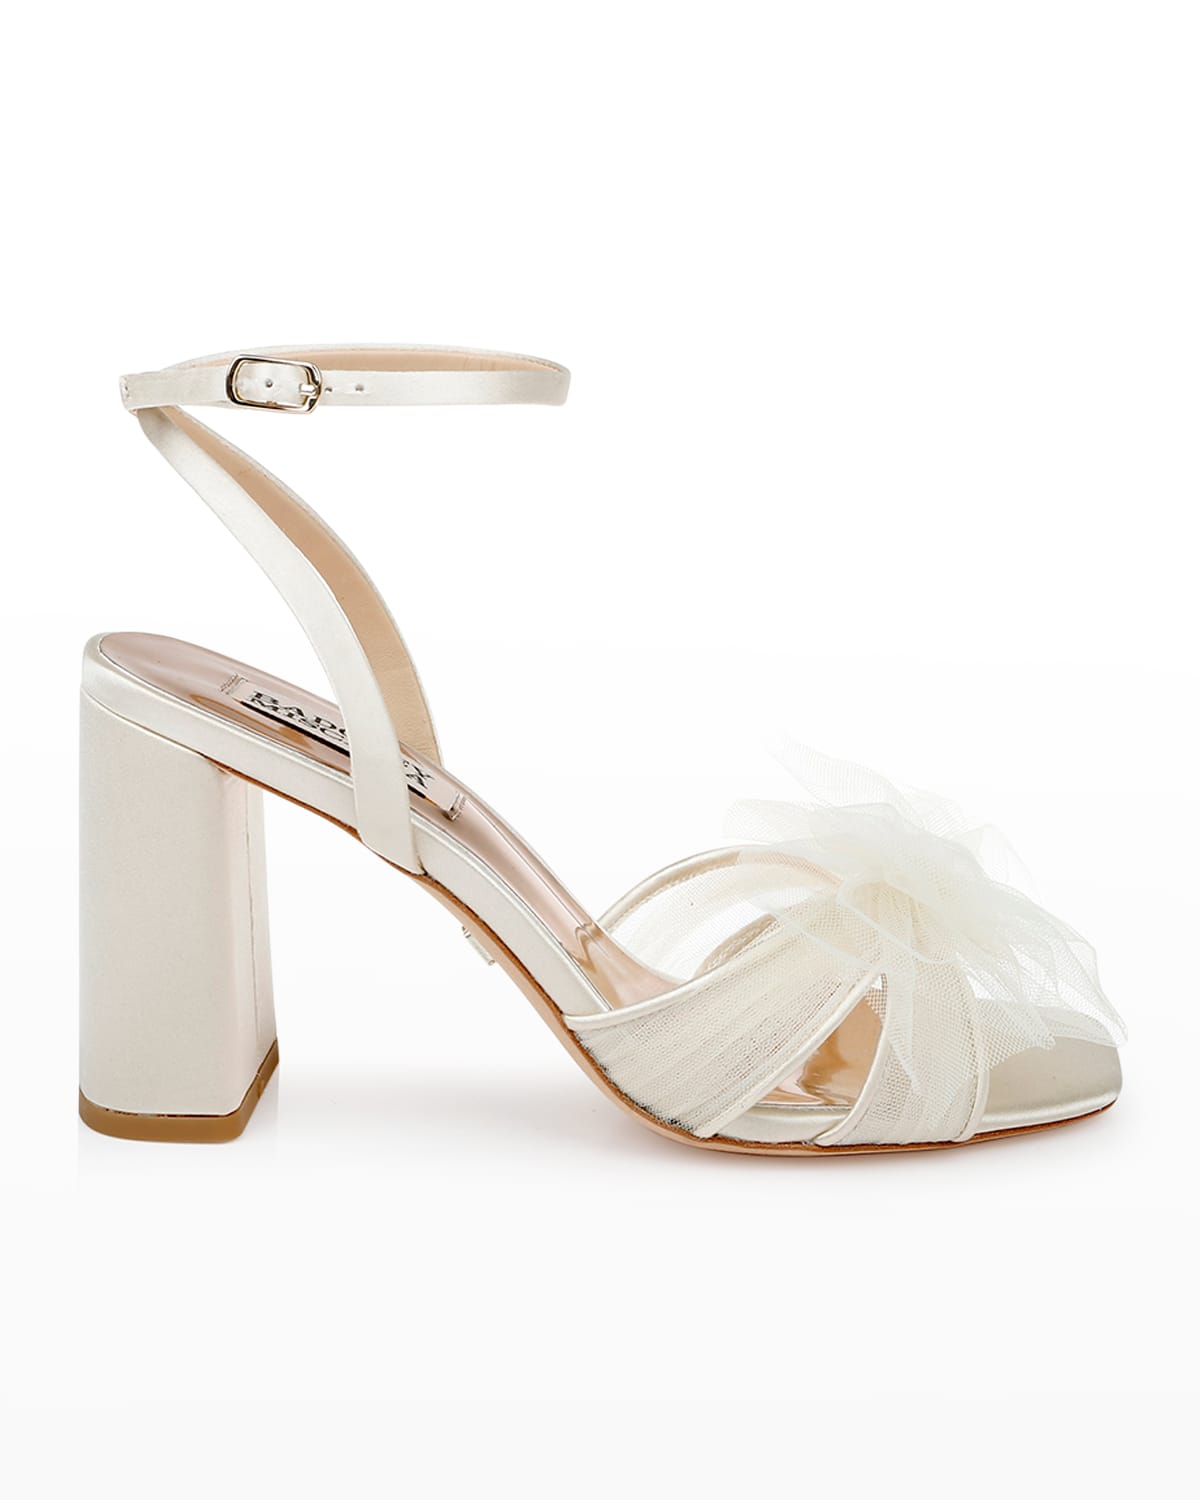 Badgley Mischka Tess Tulle Bow Ankle-Strap Sandals